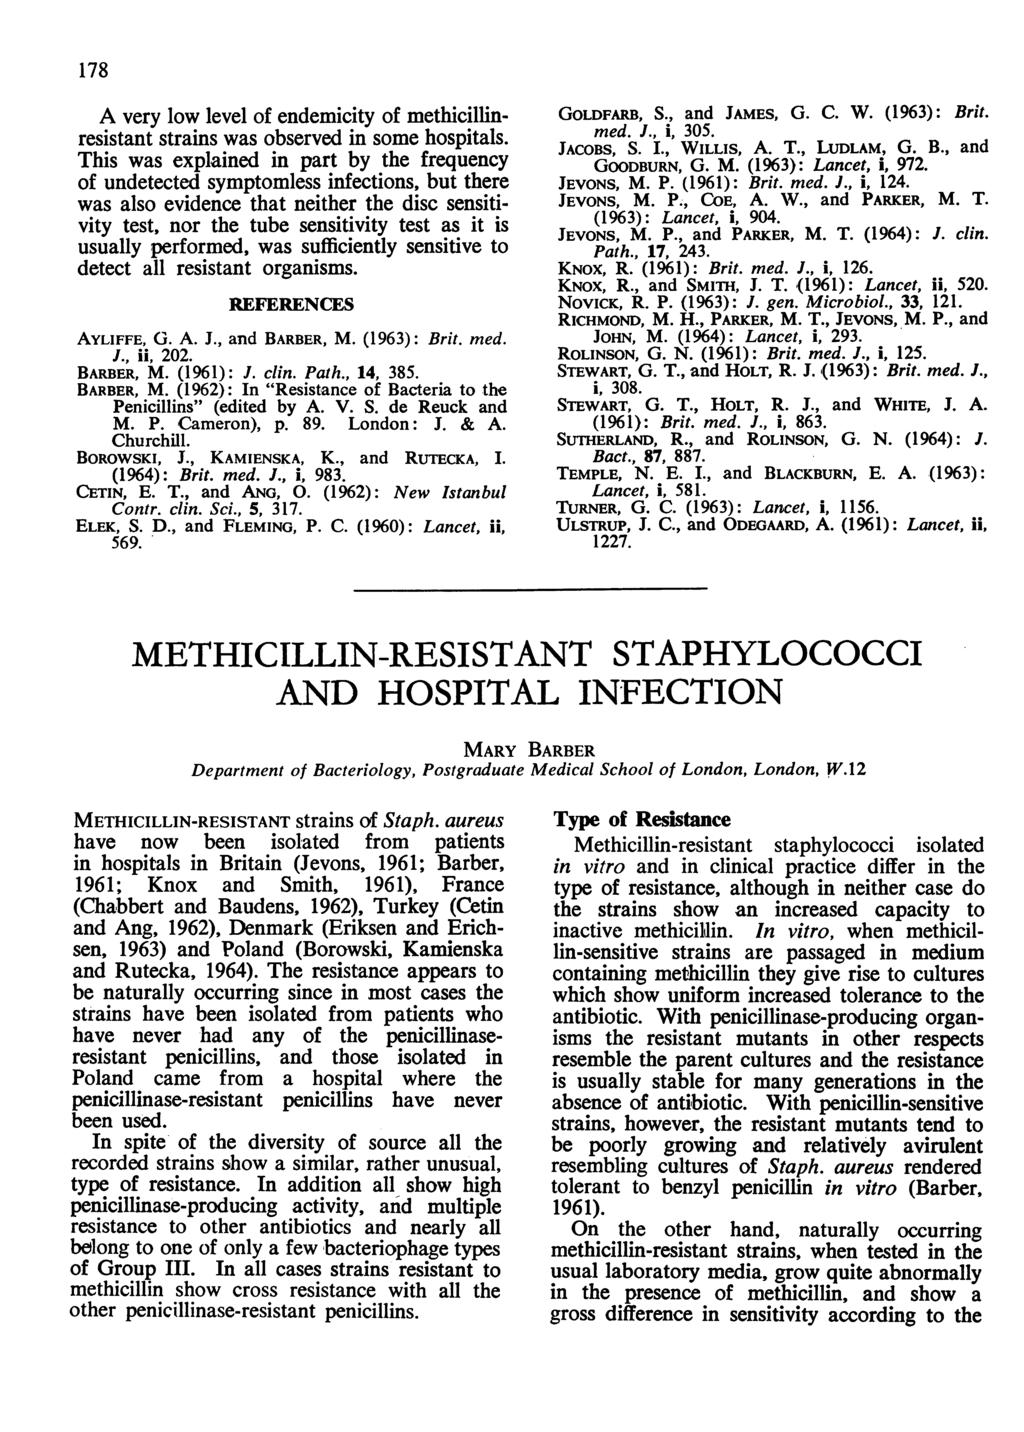 178 A very low level of endemicity of methicillinresistant strains was observed in some hospitals.